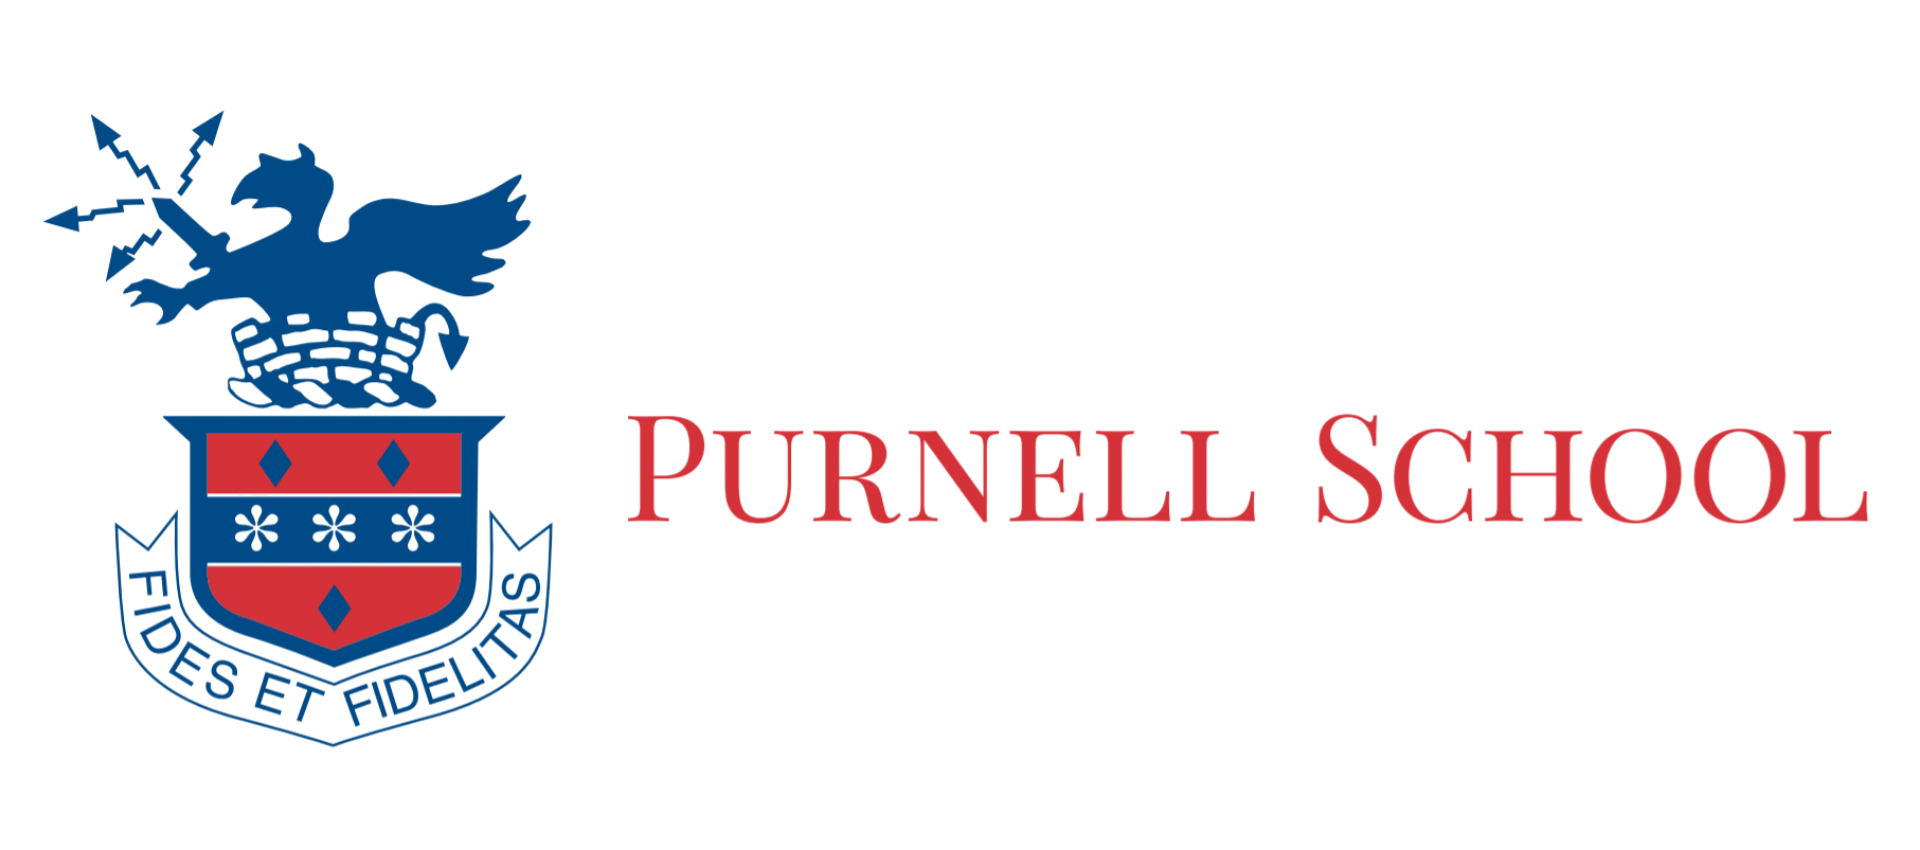 purnell logo no background.png